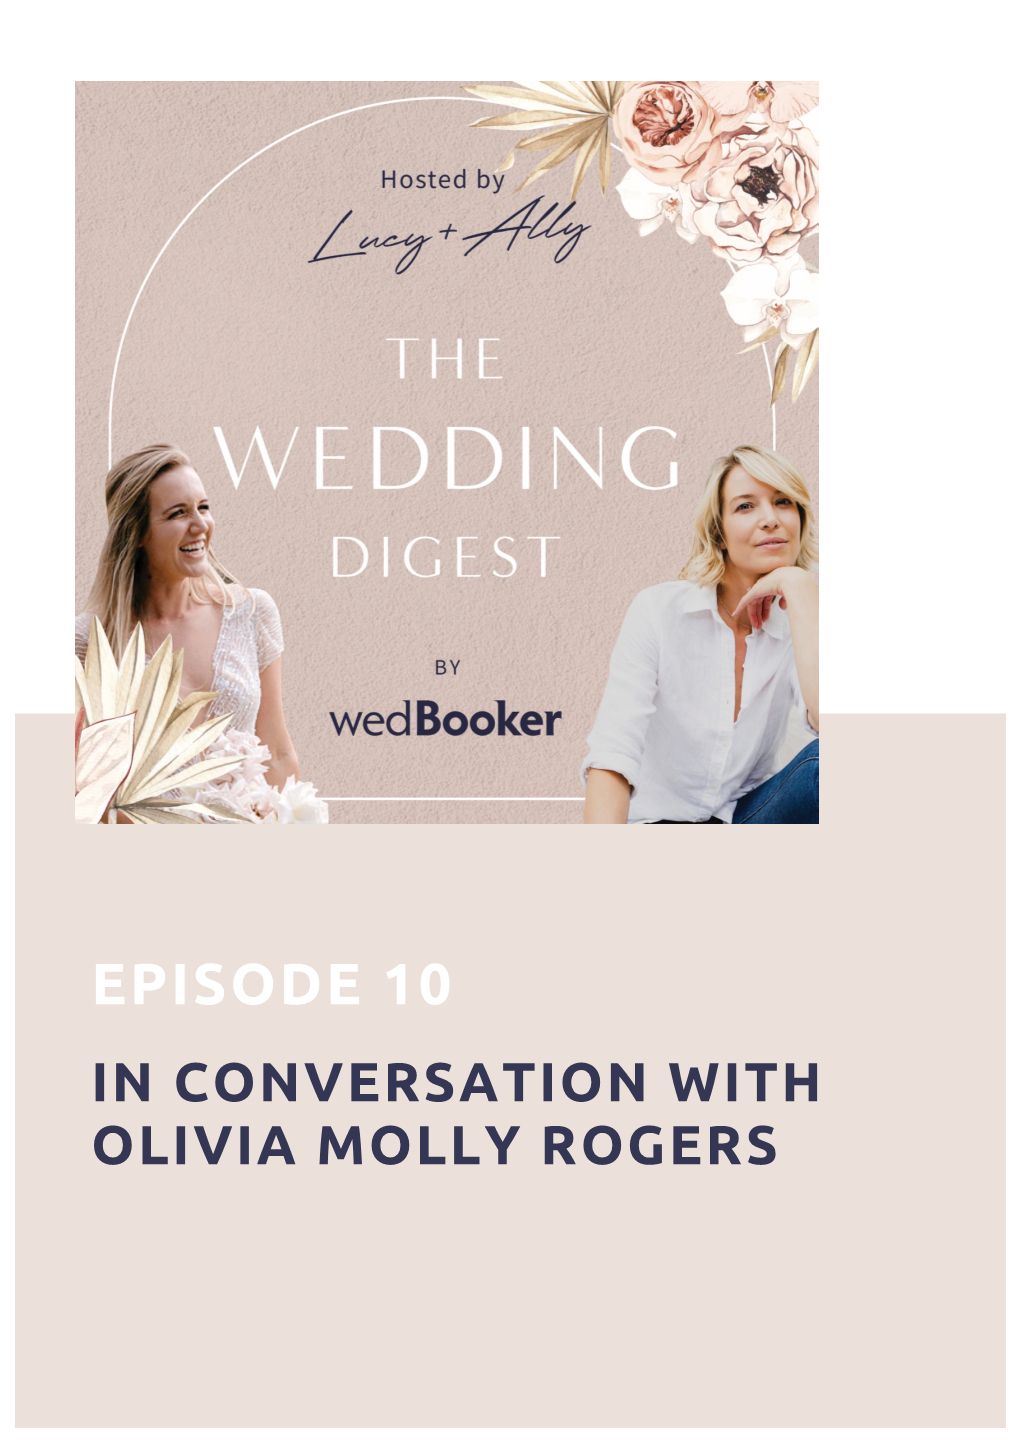 Episode 10 in Conversation with Olivia Molly Rogers